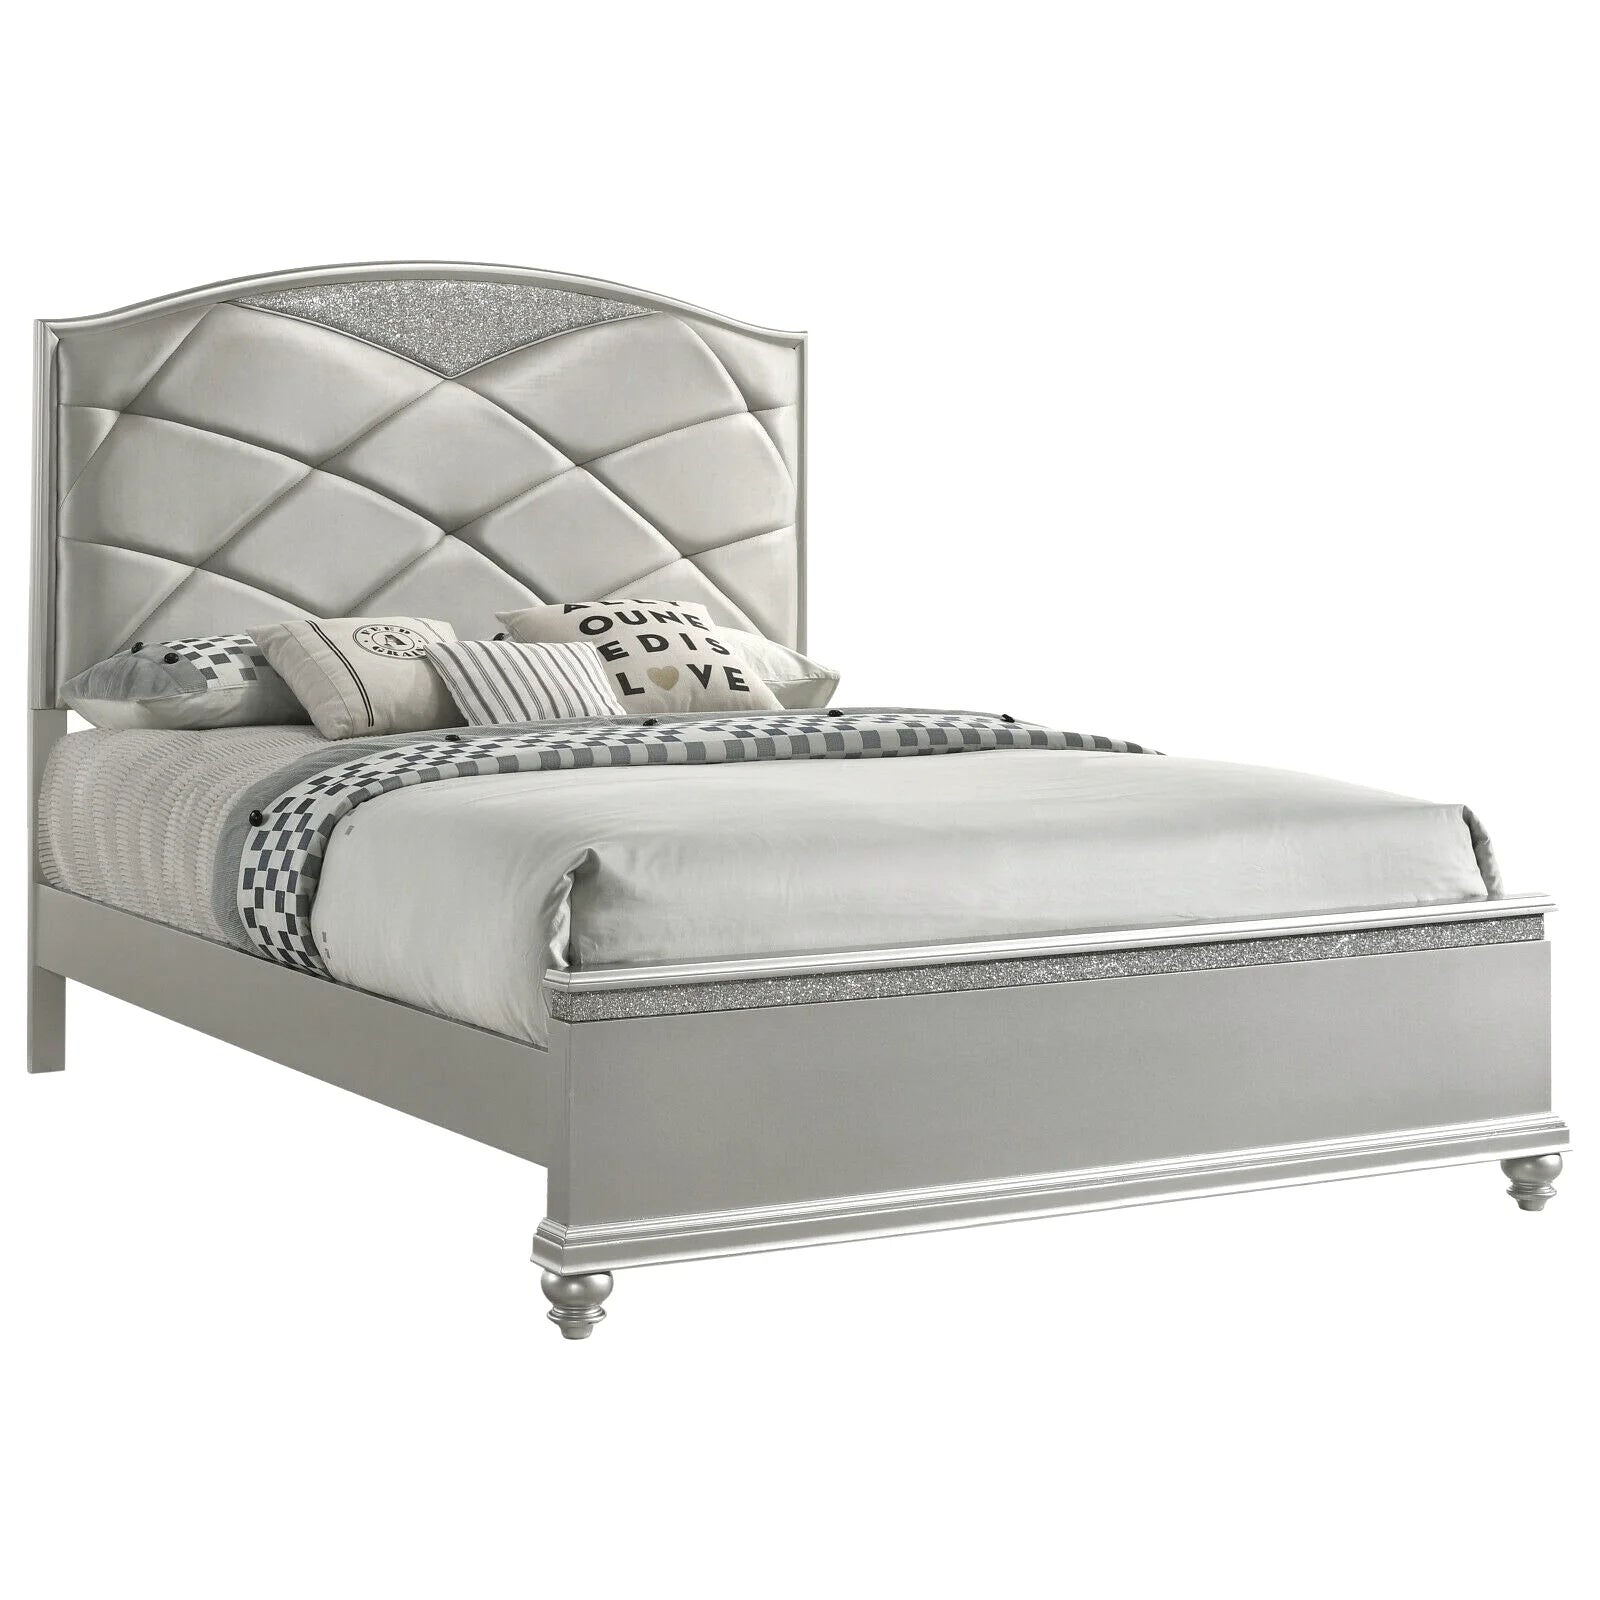 Queen/King size bedroom furniture set, high-end luxury double bed, housewife bed, wedding bed, adult and adolescent bed